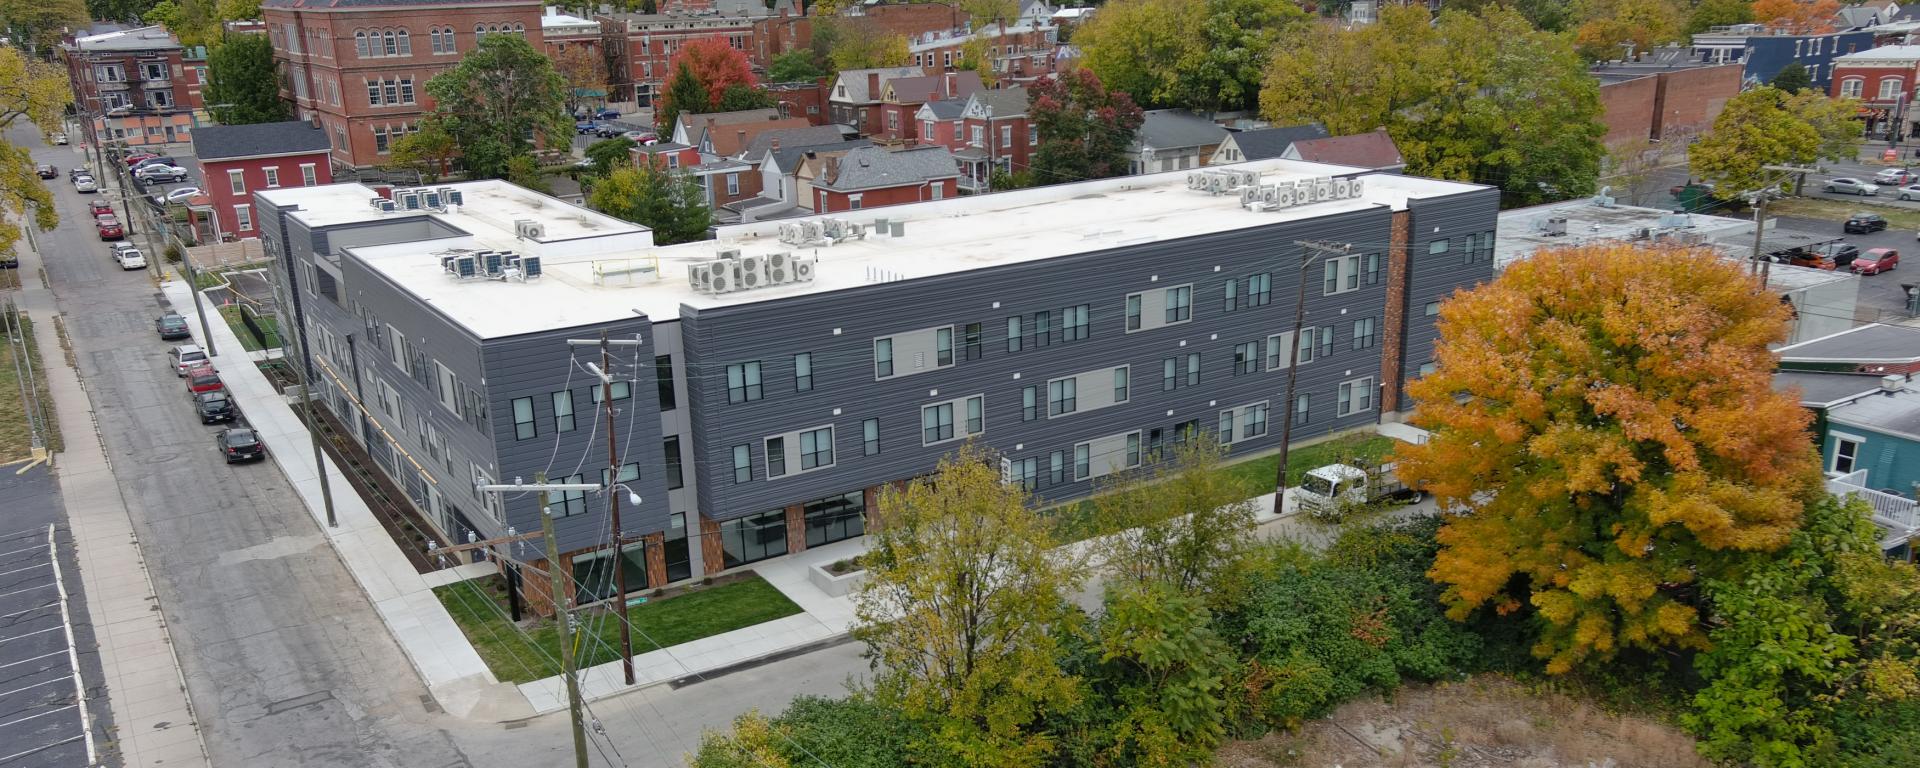 Aerial photo of a gray apartment building in urban neighborhood